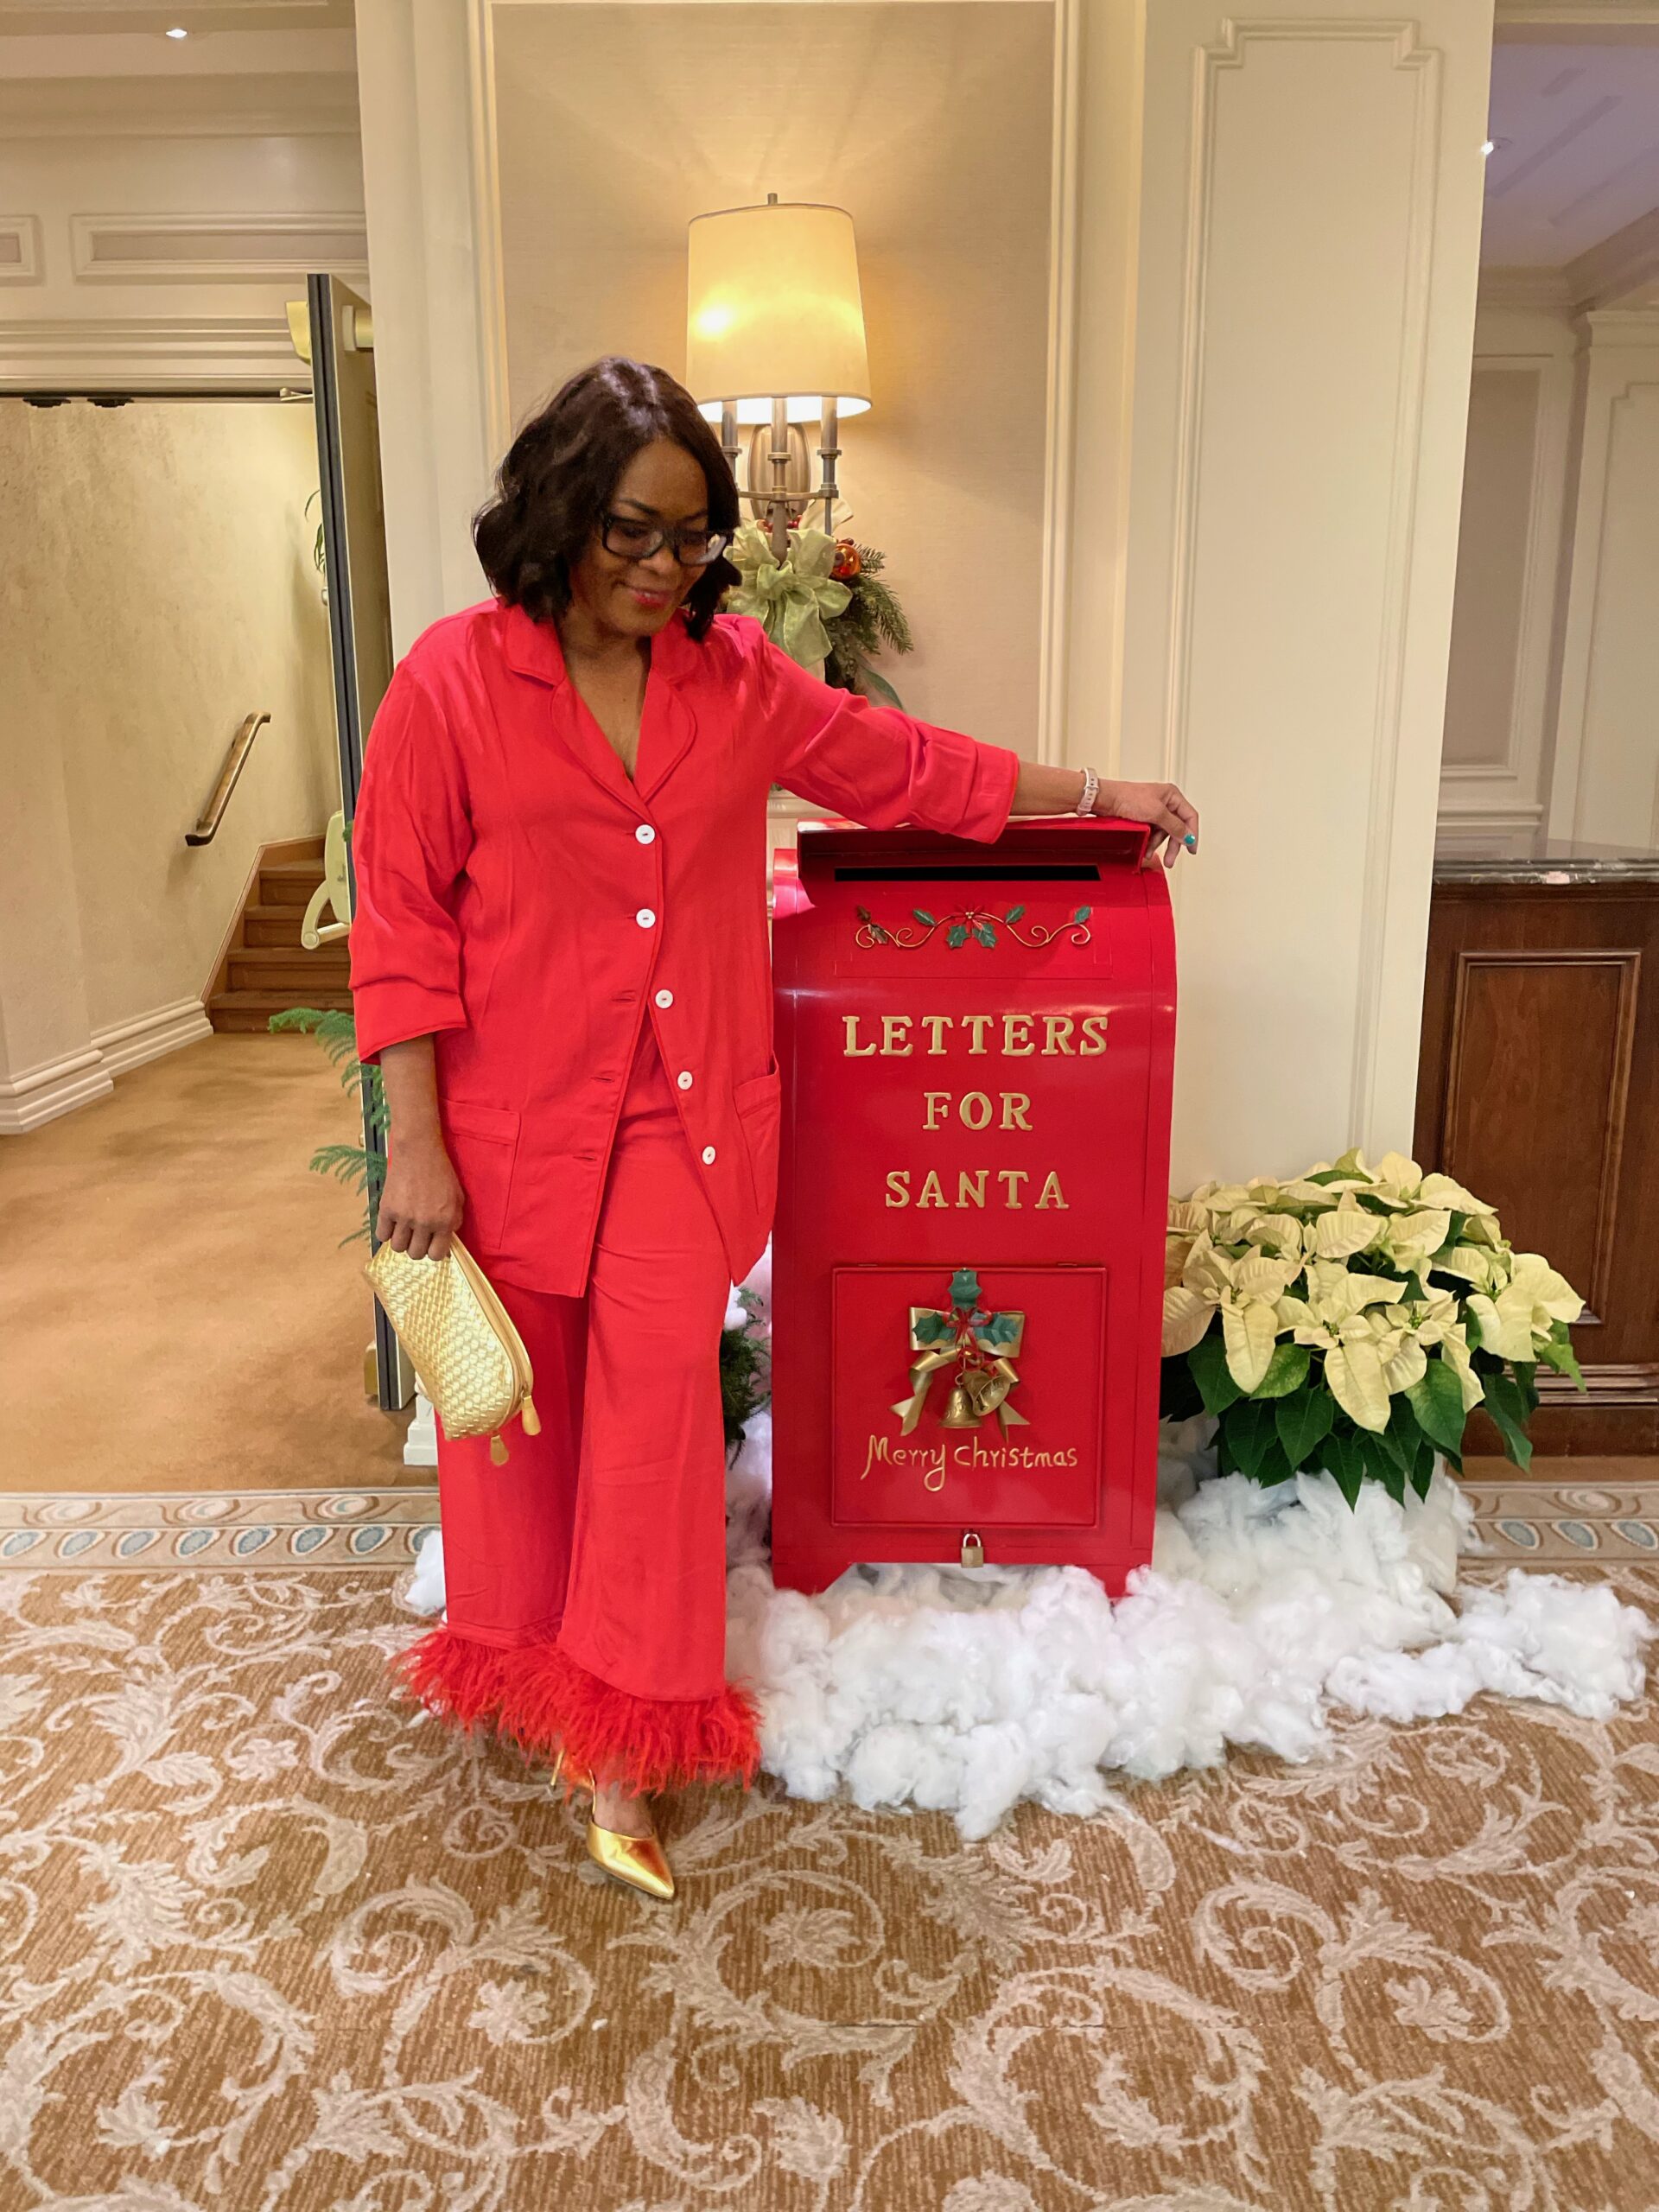 Letters for Santa Mailbox at the Hotel Hershey